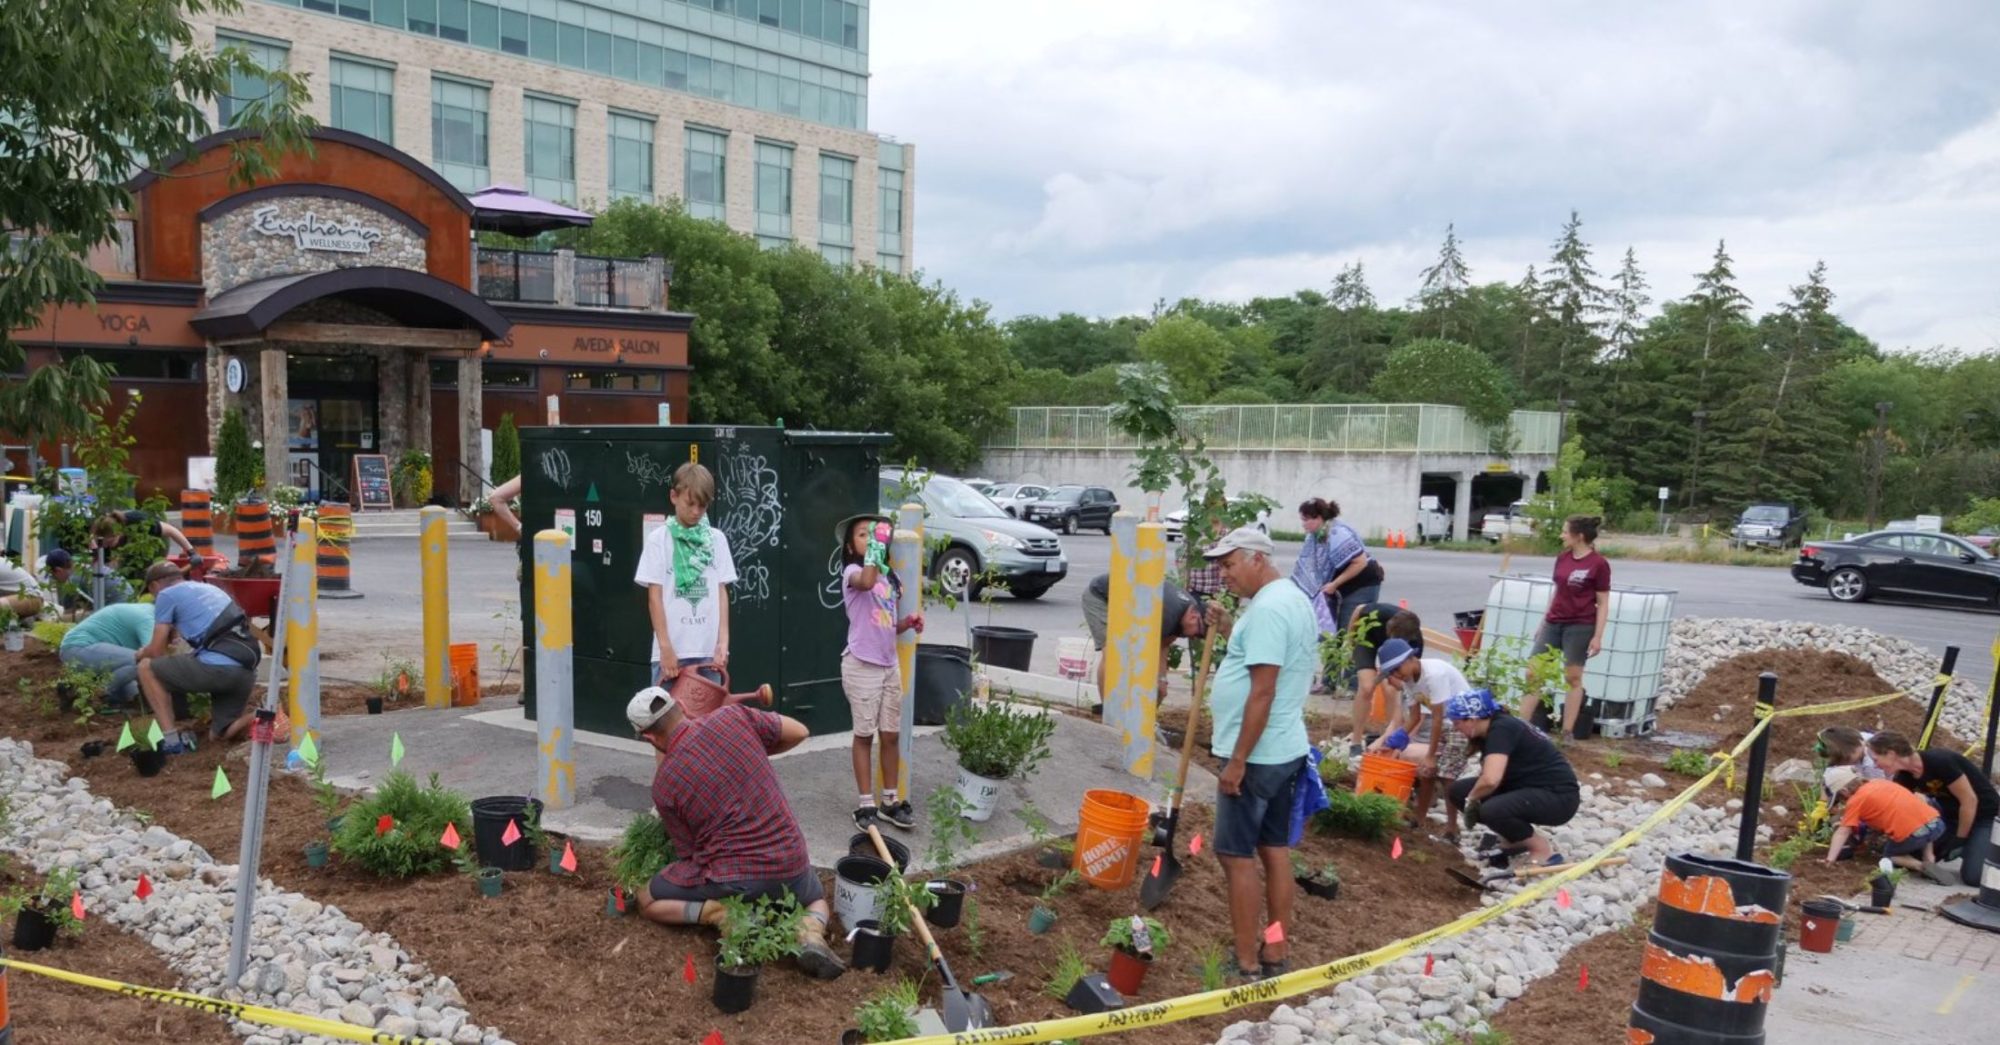 People engaged in planting a green space in a city